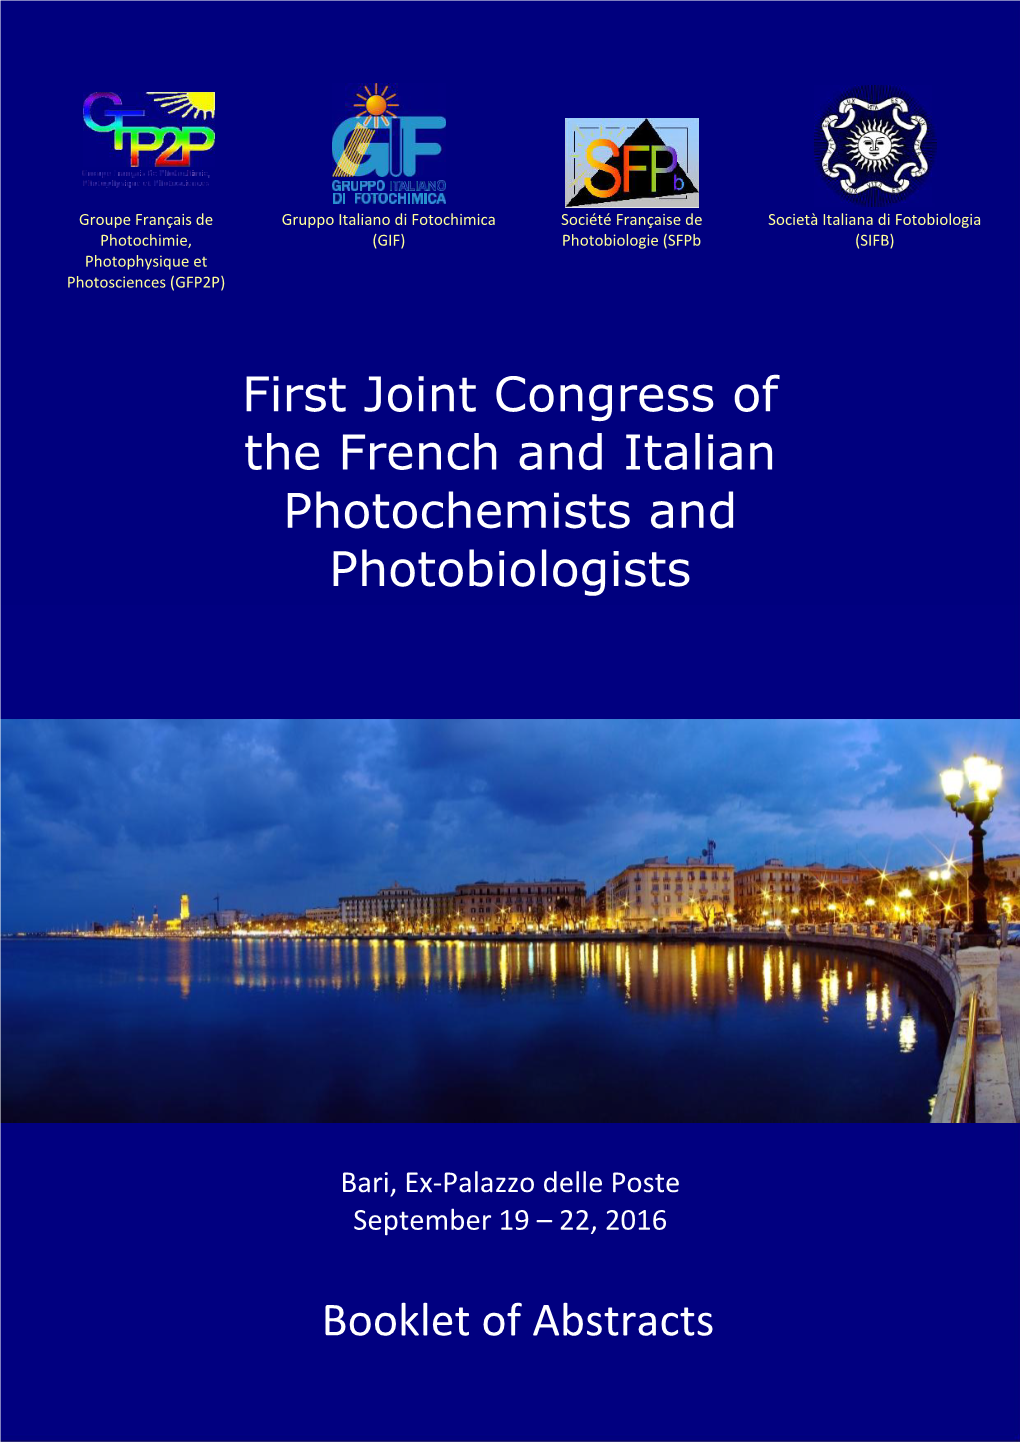 First Joint Congress of the French and Italian Photochemists and Photobiologists Booklet of Abstracts